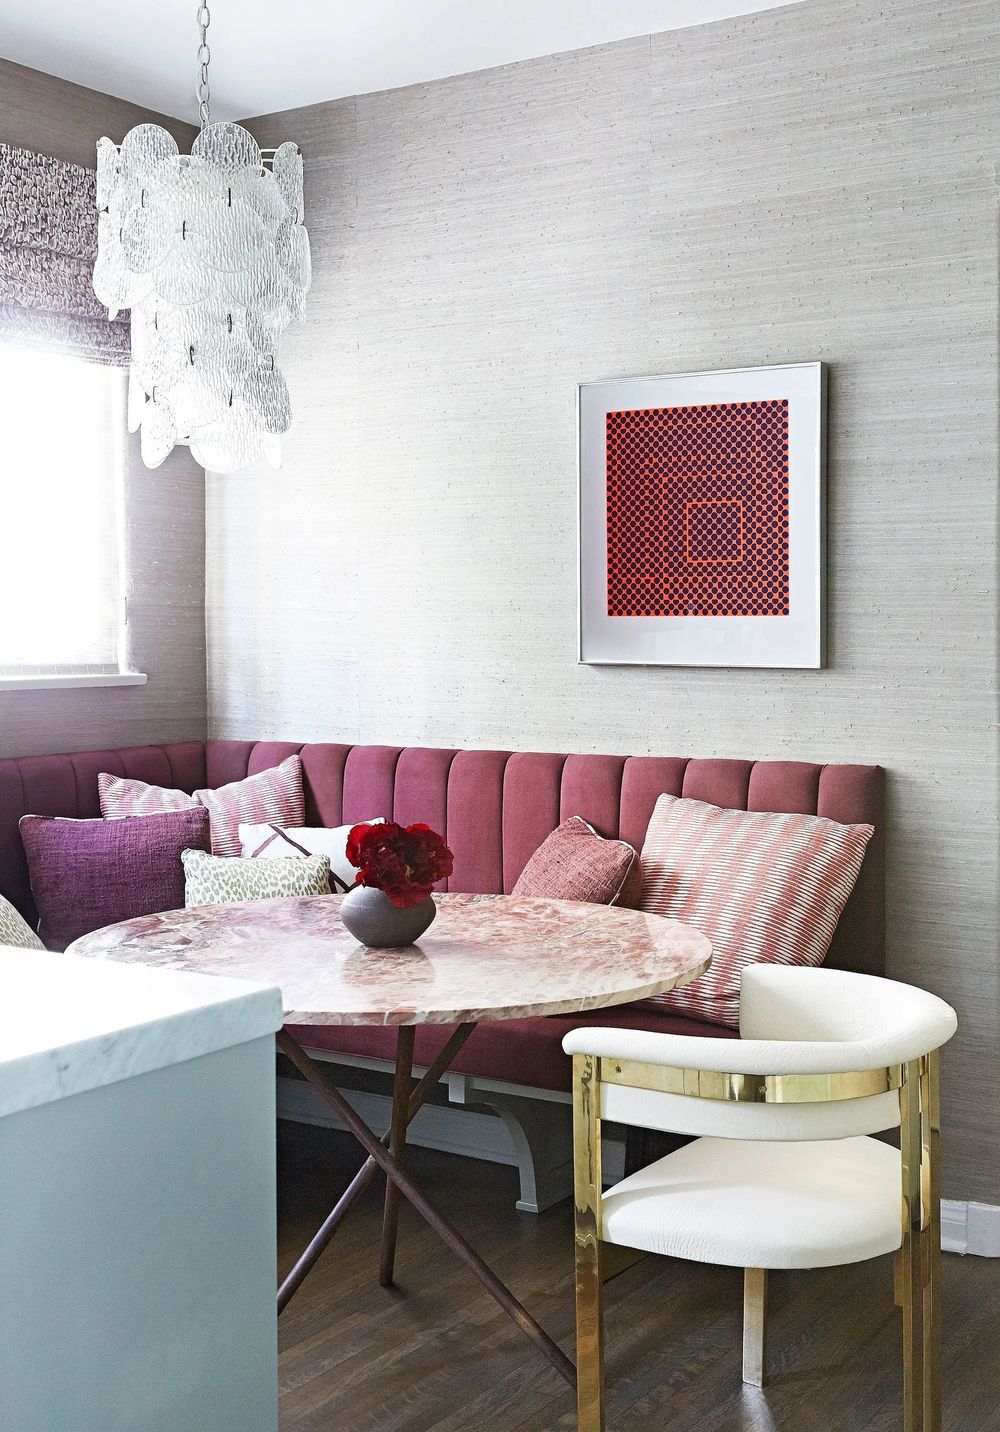 Pink channeled bench with Kelly Wearstler chair and vintage rose marble table via Christos Prevezanos